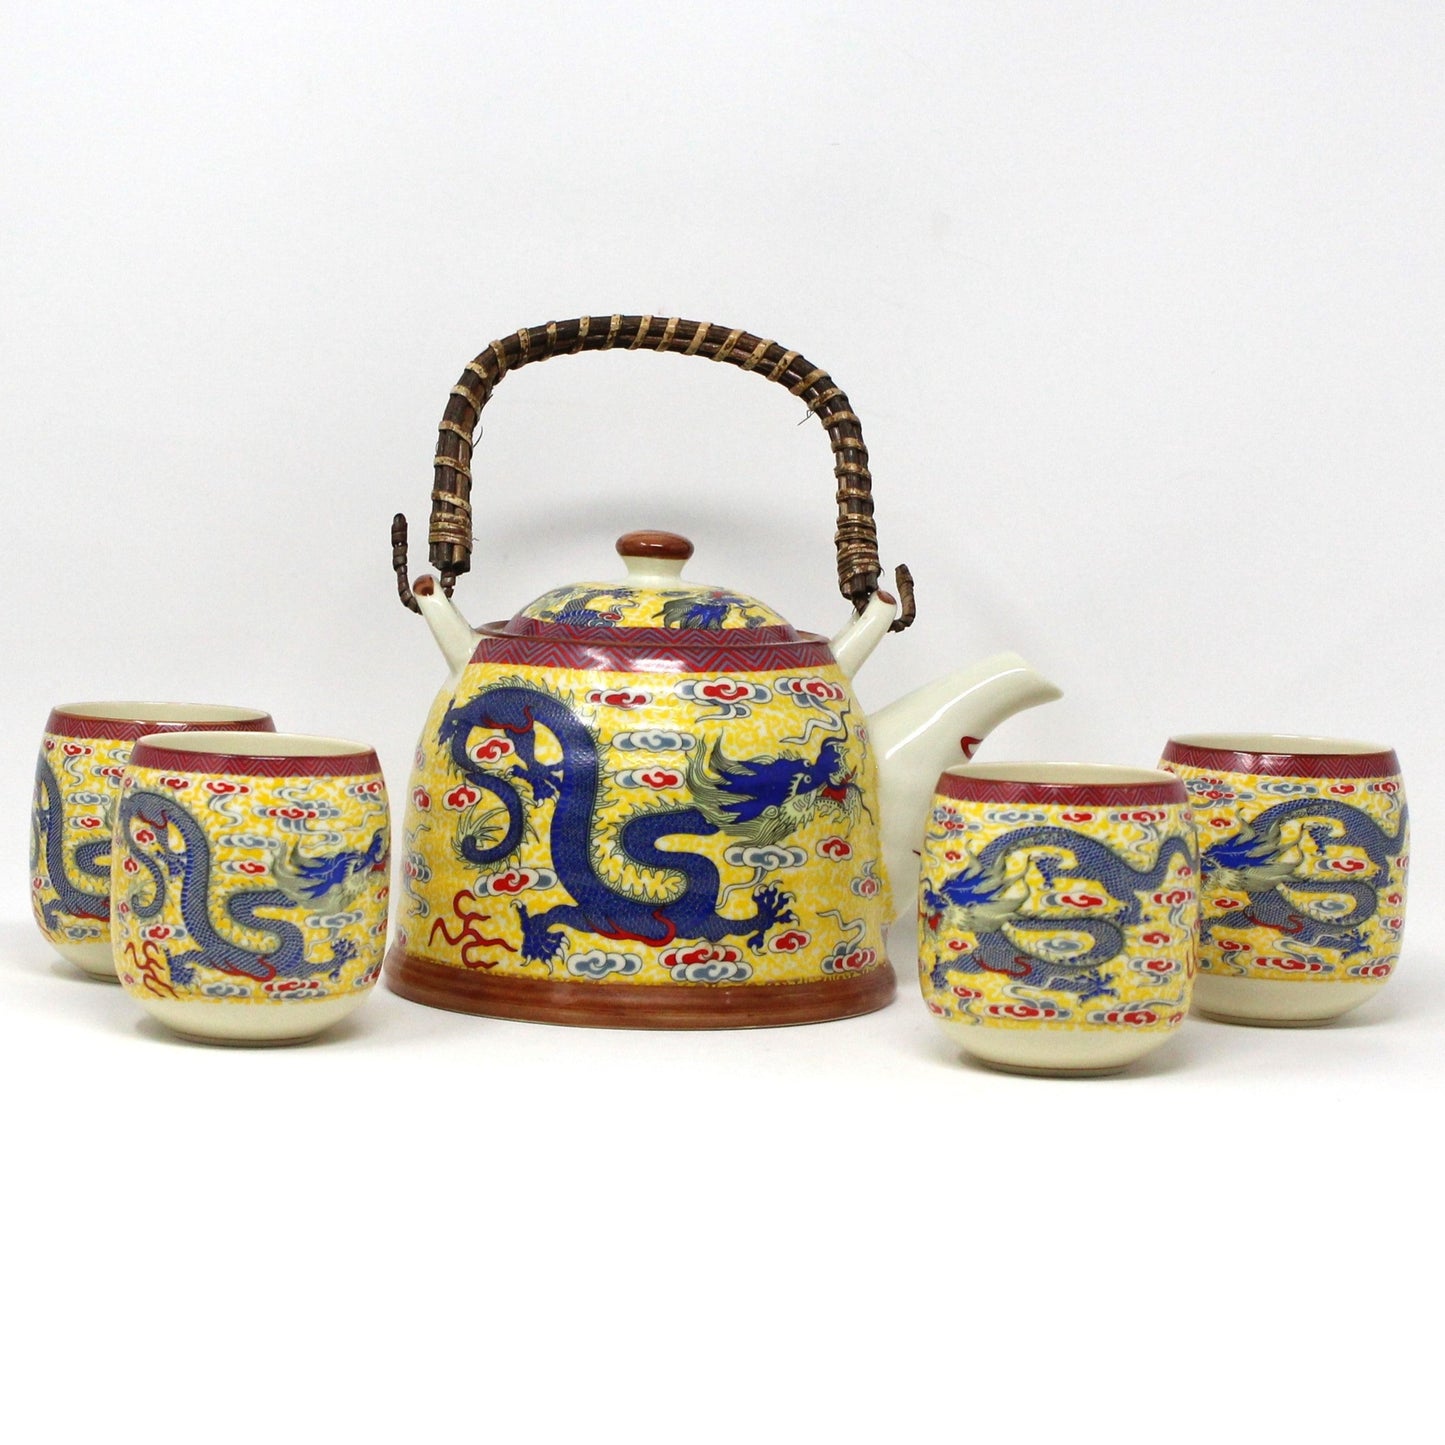 Tea Set, Teapot & 4 Teacups, Imperial Yellow with Blue Chinese Dragon, 5 Pcs